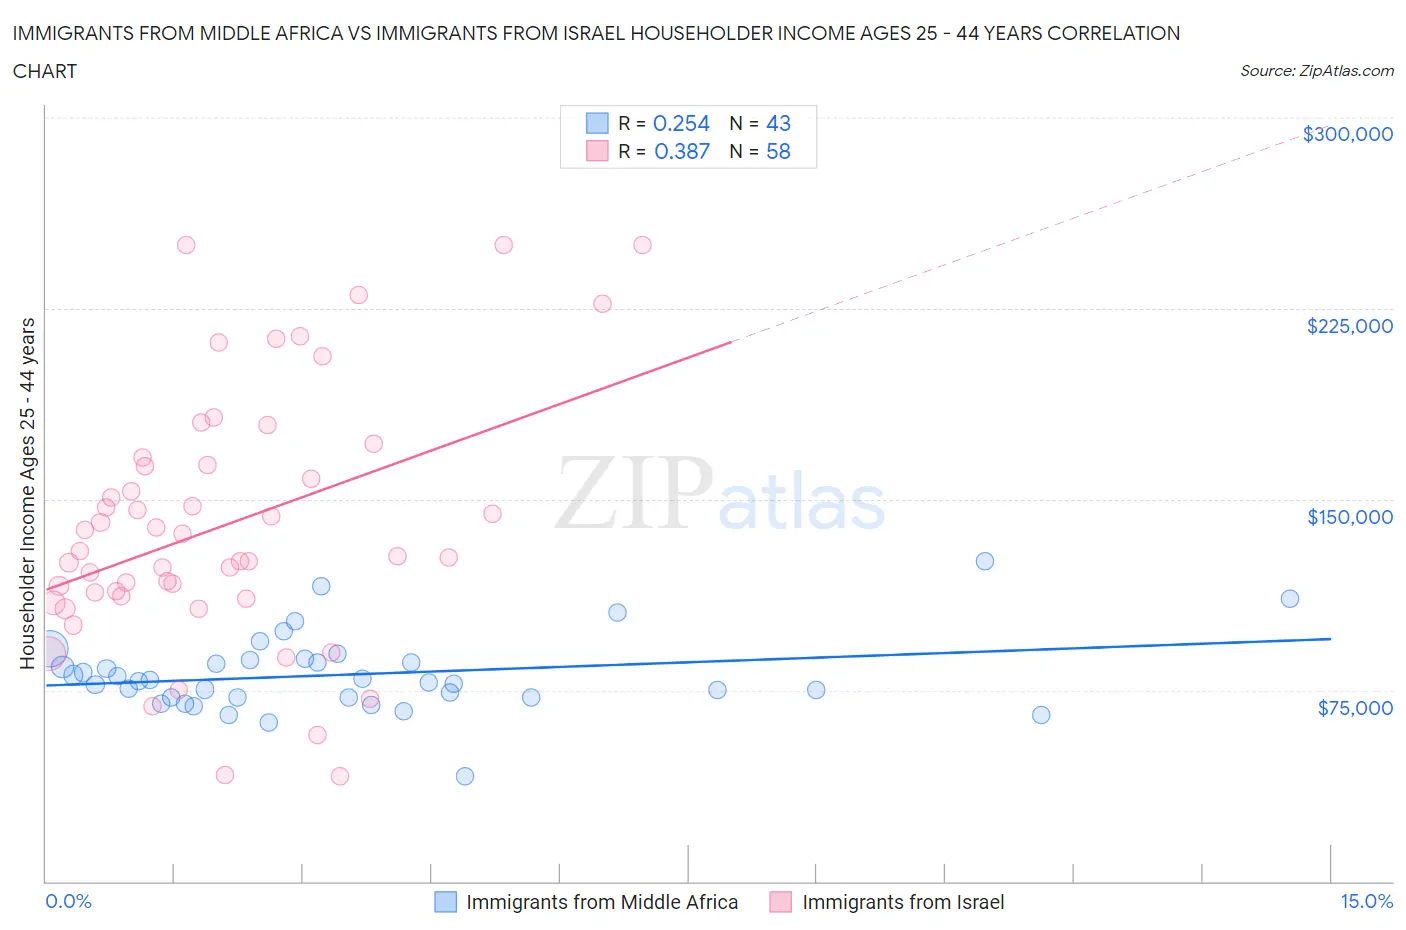 Immigrants from Middle Africa vs Immigrants from Israel Householder Income Ages 25 - 44 years